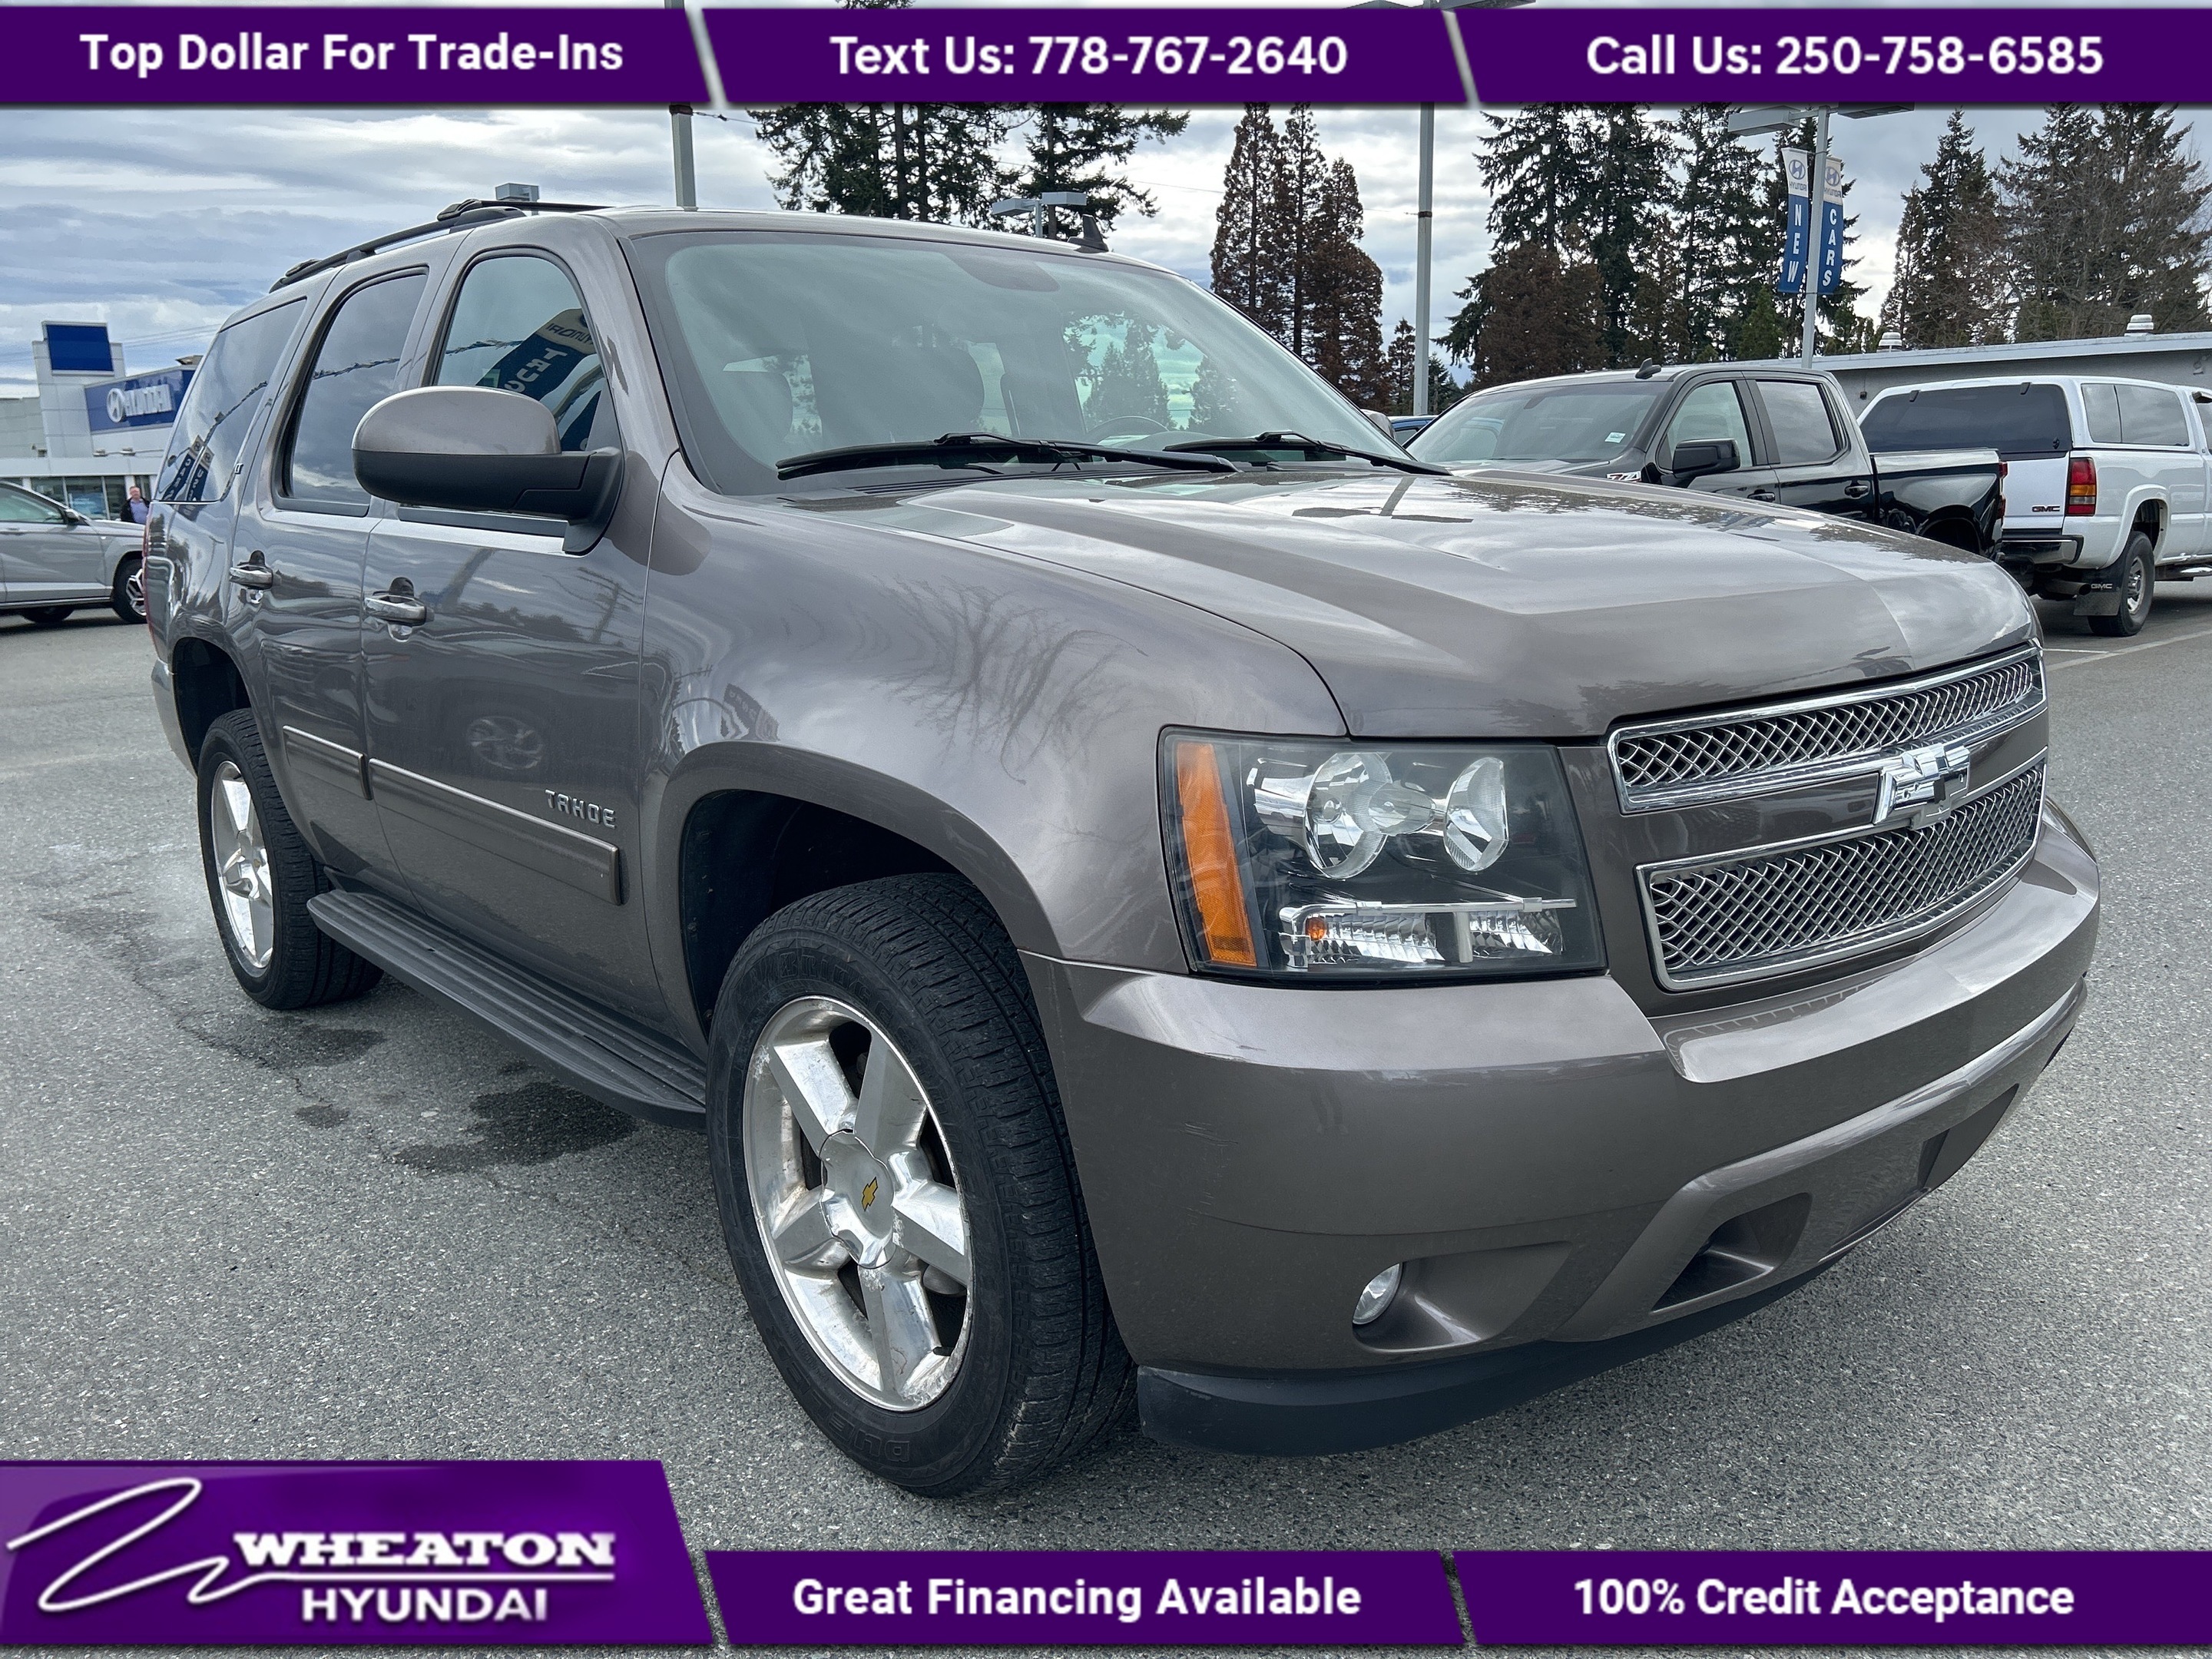 2011 Chevrolet Tahoe LT, Trade in, Leather, Heated Seats, Sunroof, DVD,